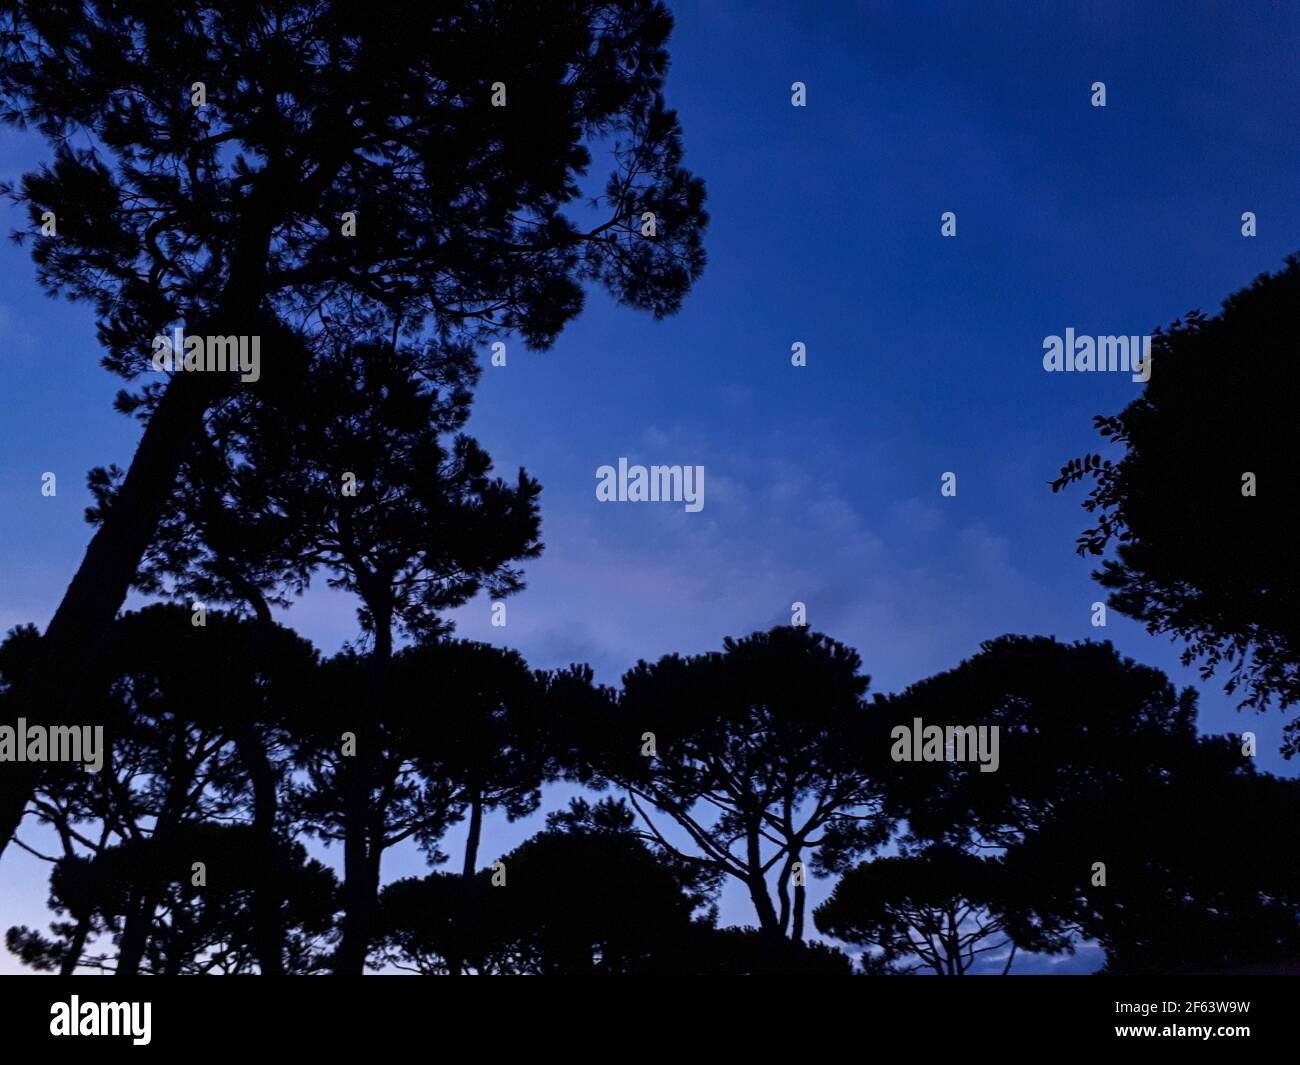 silhouette of pine trees in the evening sky in Cavallino, Italy Stock Photo